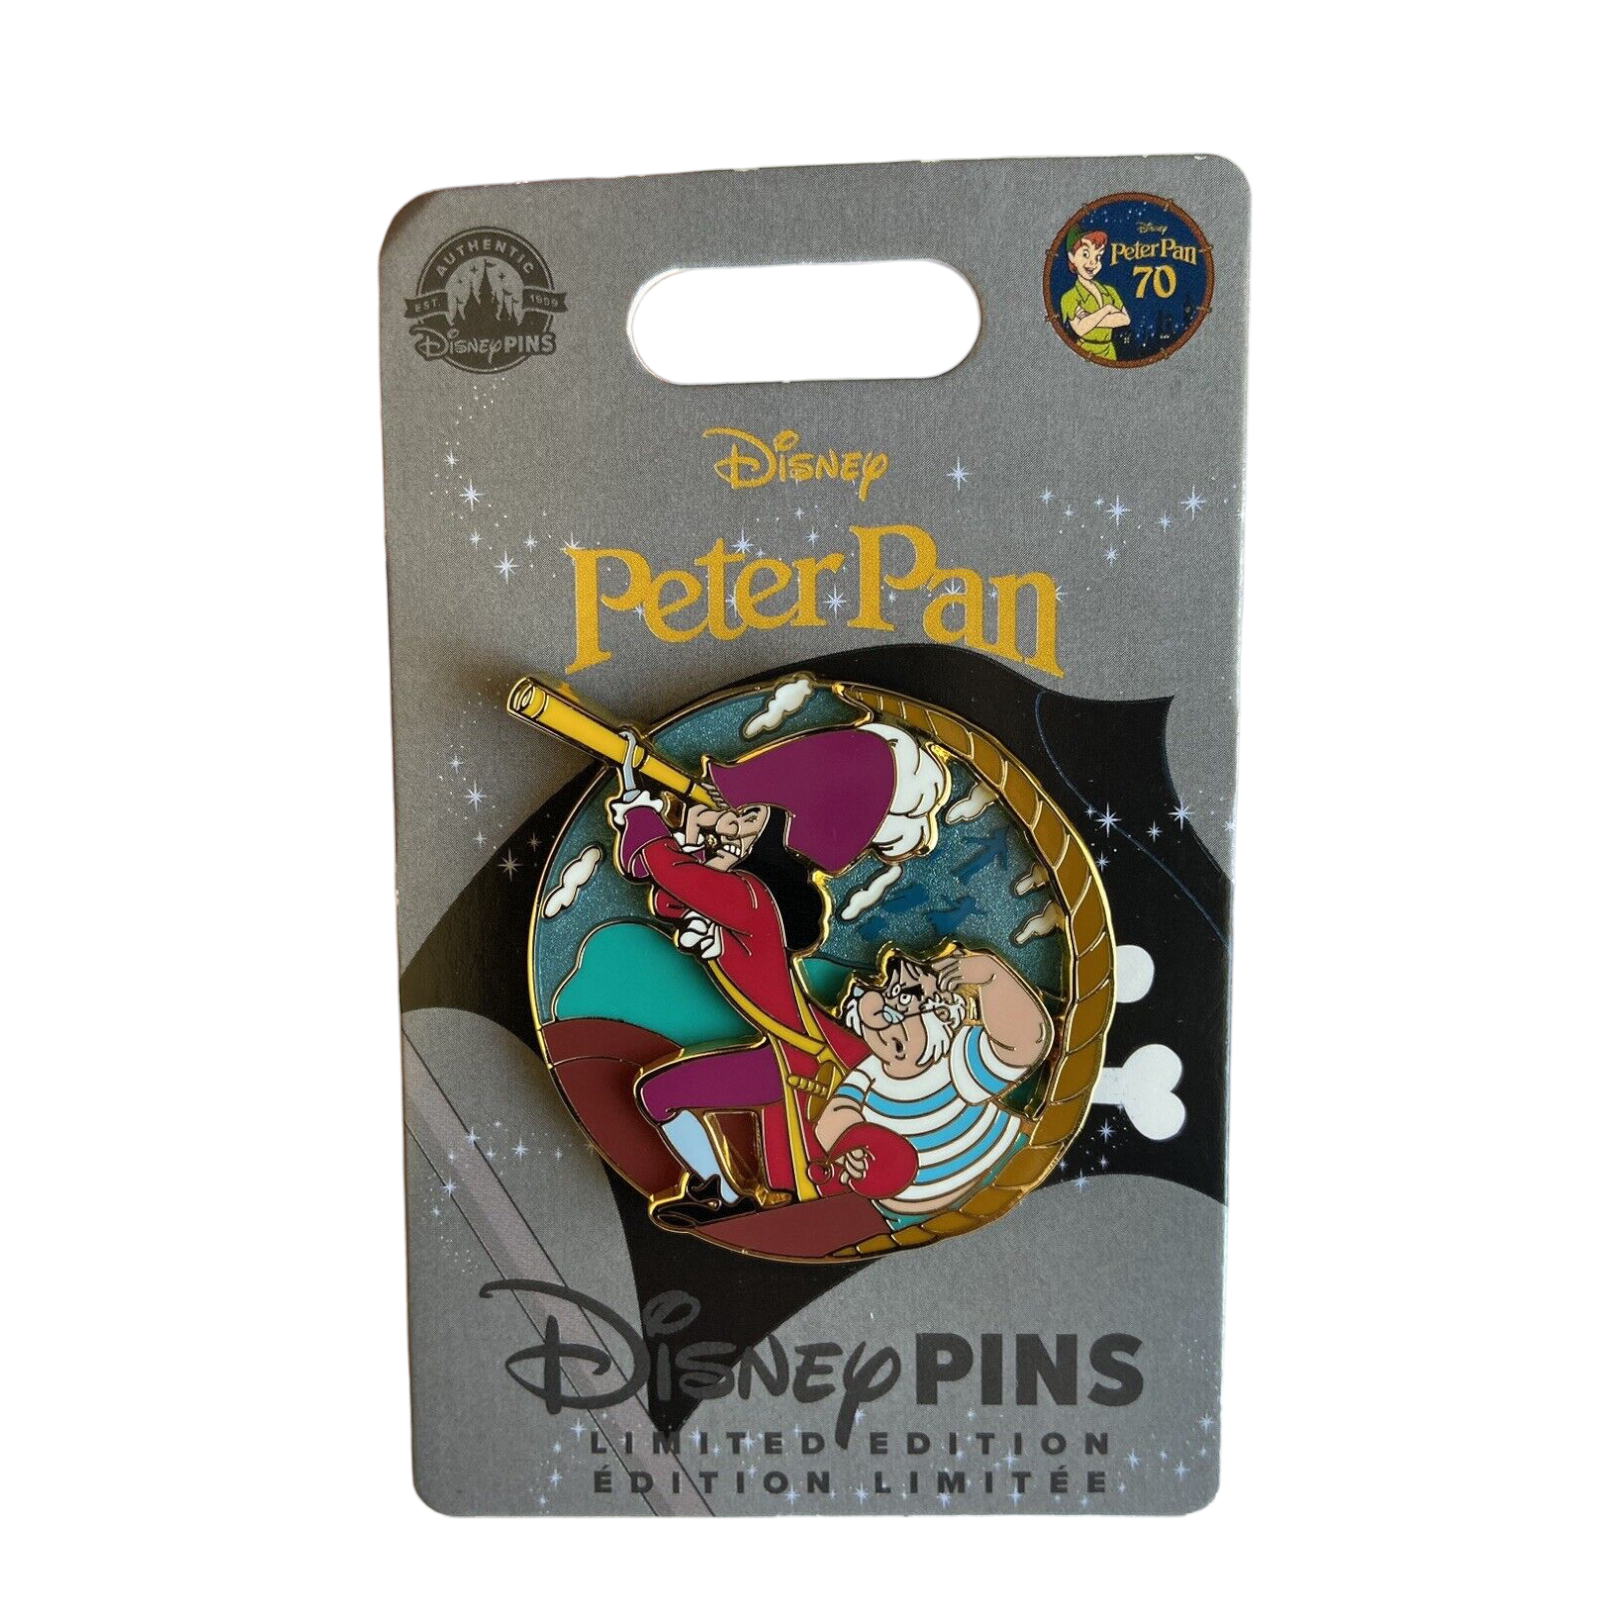 Captain Hook and Mr. Smee Peter Pan 70th Anniversary Pin – My